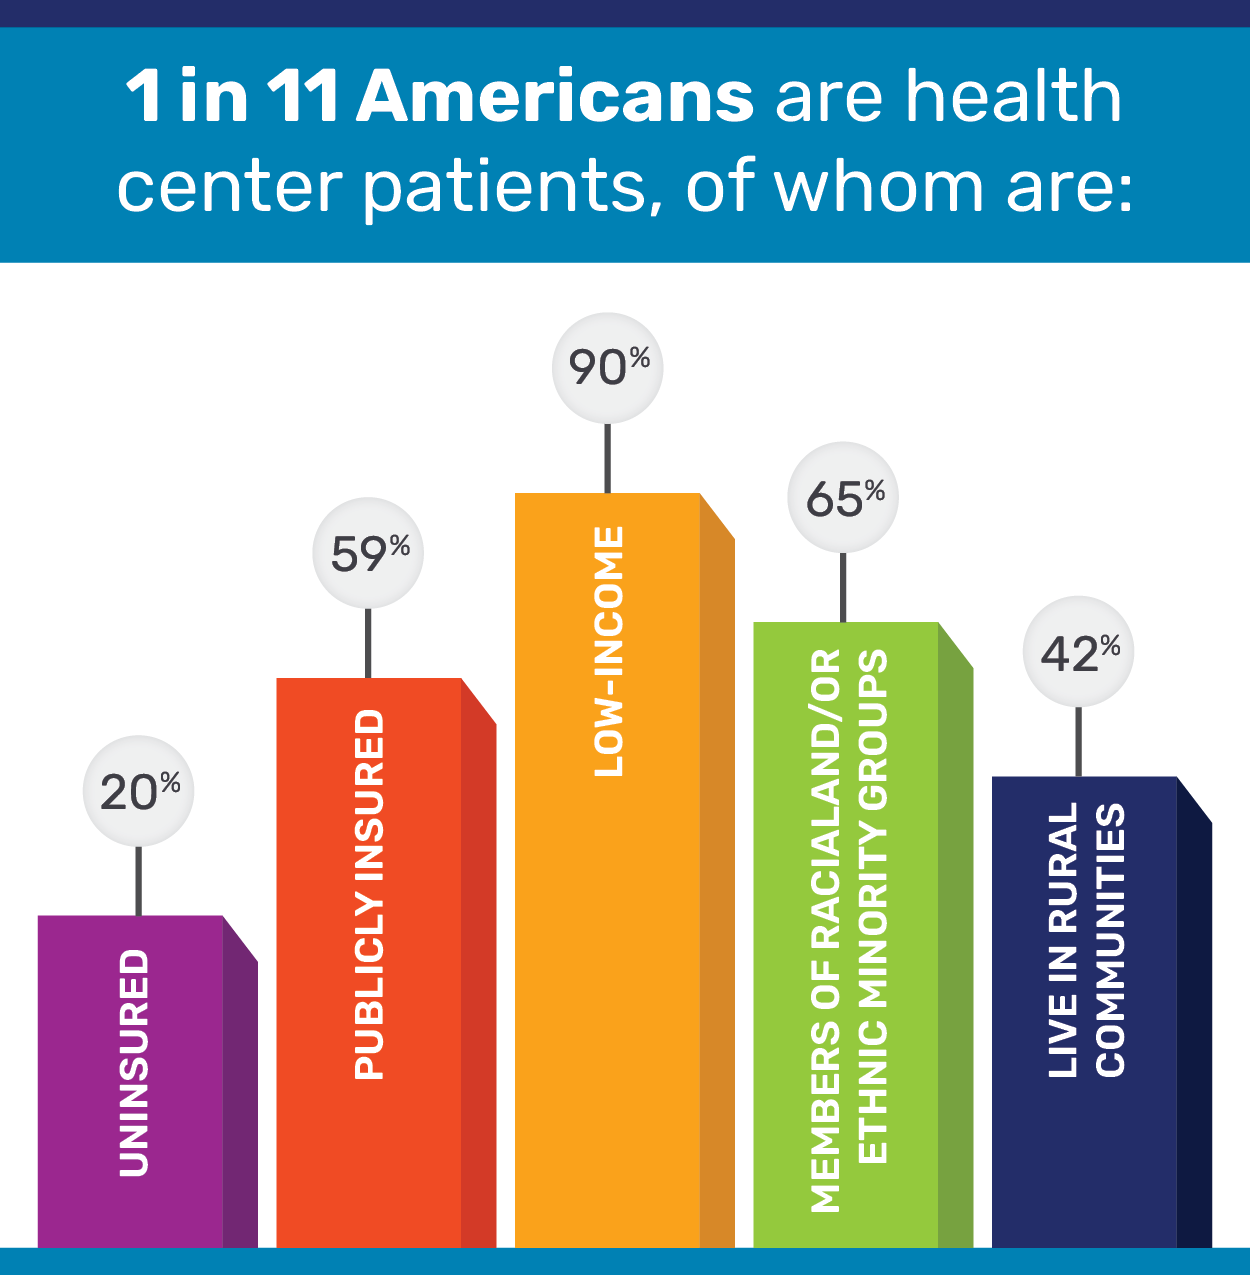 1 in 11 Americans are health center patients.